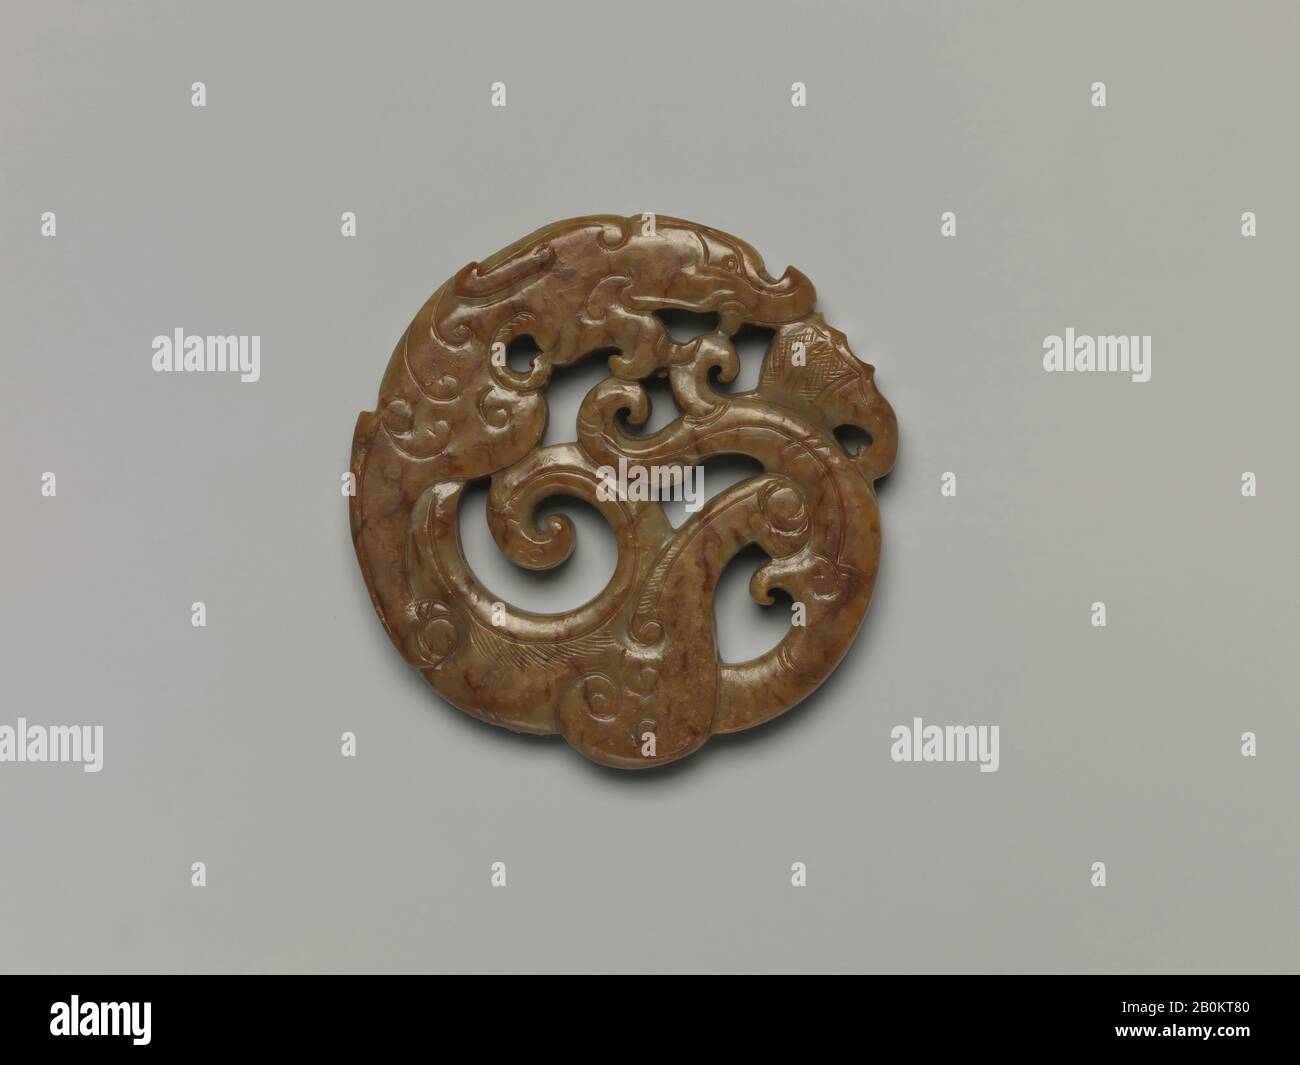 Circular Plaque with Design of a Fantastic Animal, China, Qing dynasty (1644–1911), Culture: China, Jade (nephrite), Diam. 2 1/4 in. (5.7 cm); D. 1/4 in. (0.6 cm), Jade Stock Photo